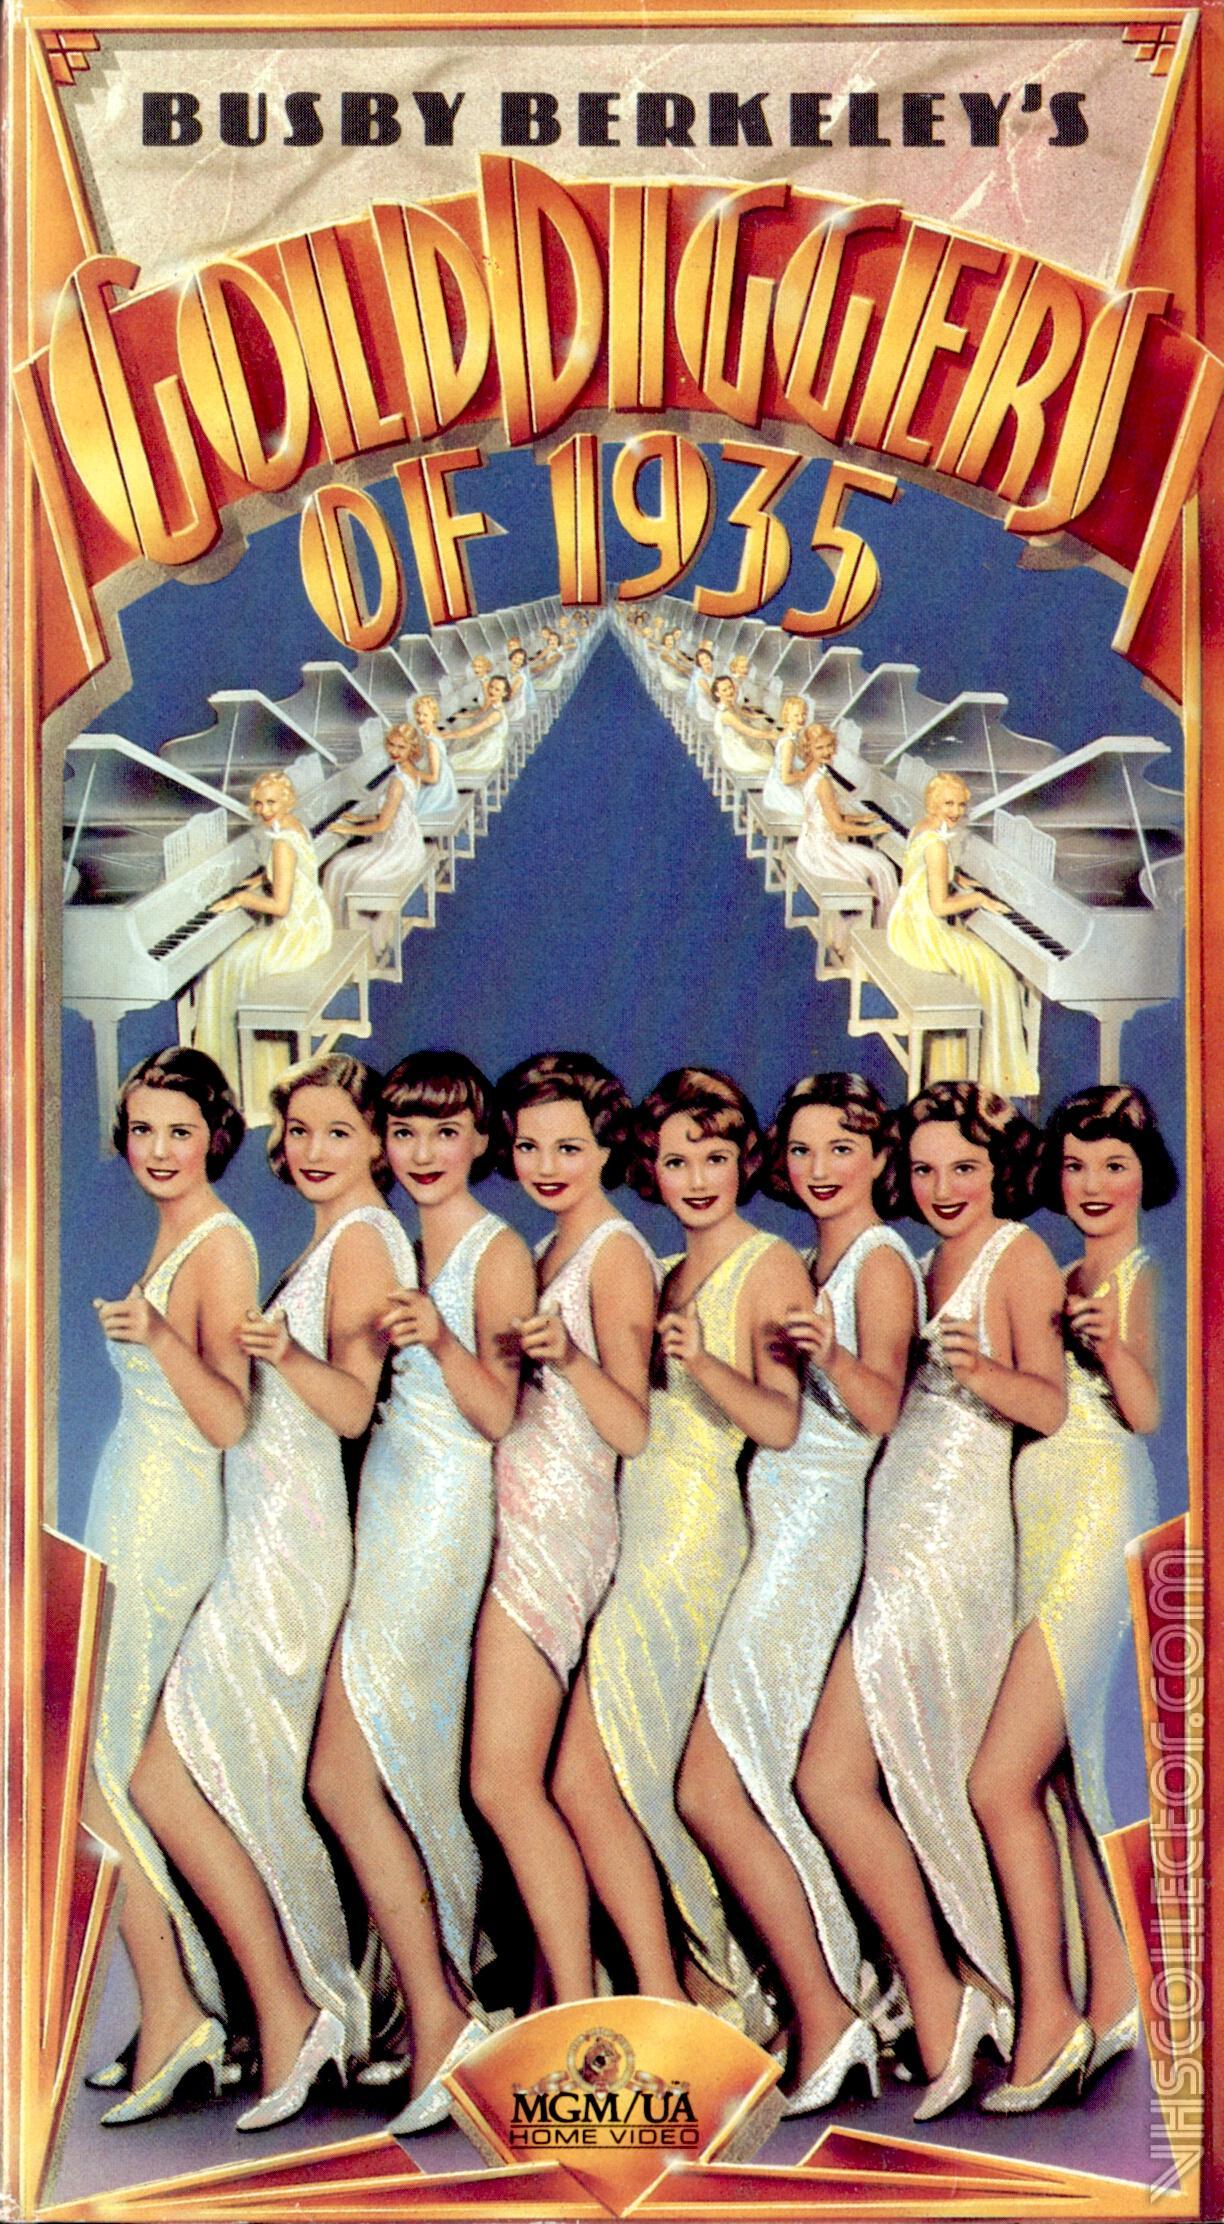 Gold Diggers of 1935 DVD 12569678514